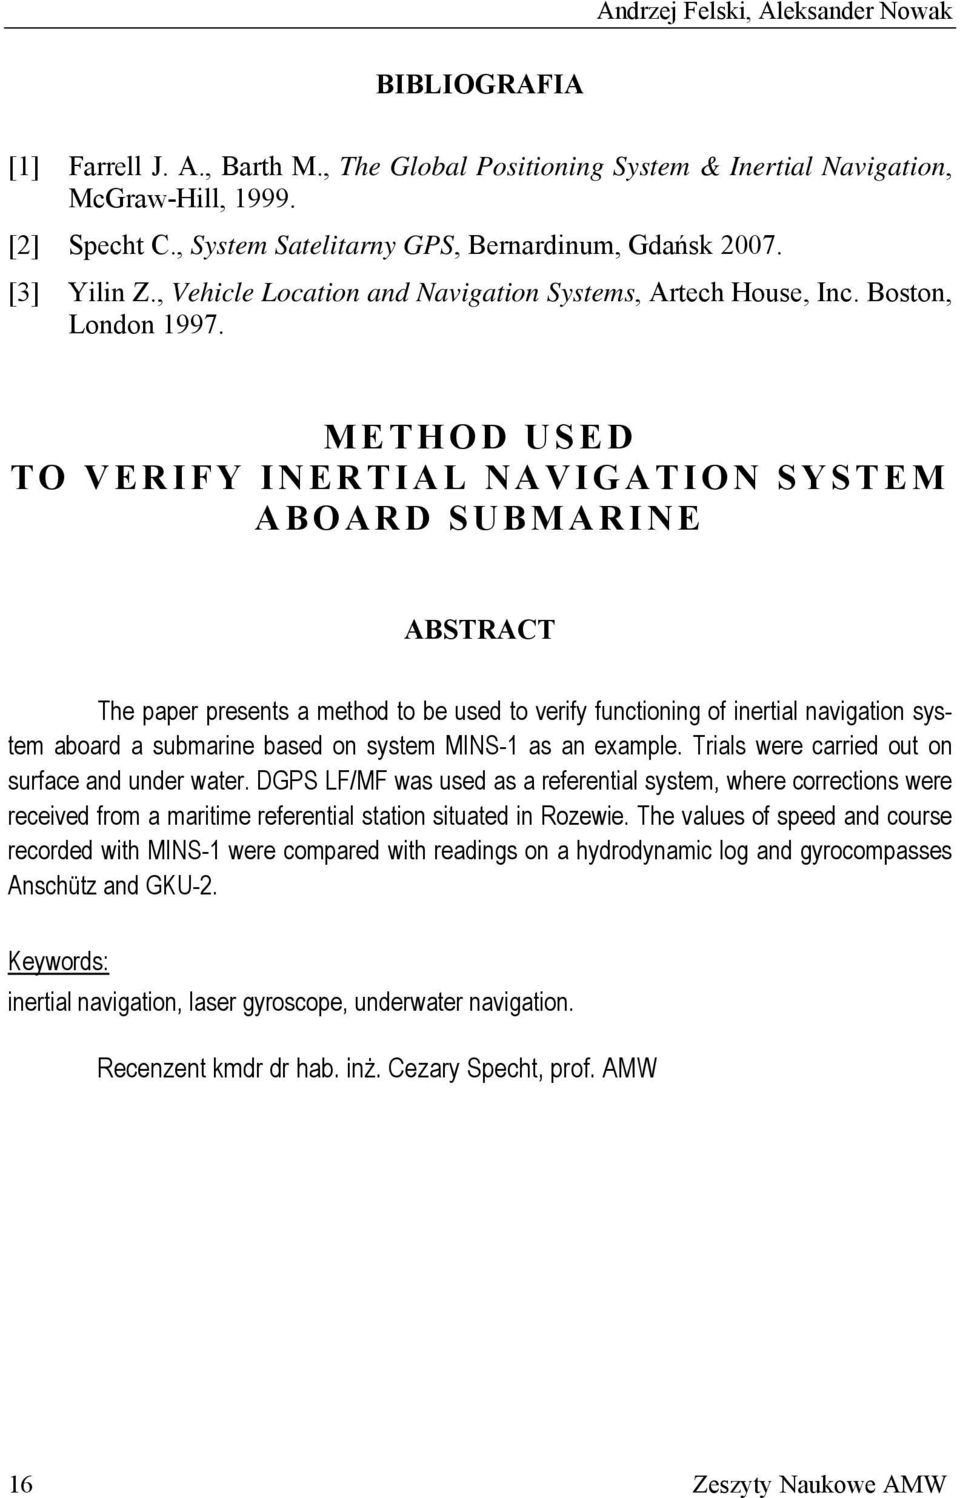 METHOD USED TO VERIFY INERTIAL NAVIGATION SYSTEM ABOARD SUBMARINE ABSTRACT The paper presents a method to be used to verify functioning of inertial navigation system aboard a submarine based on